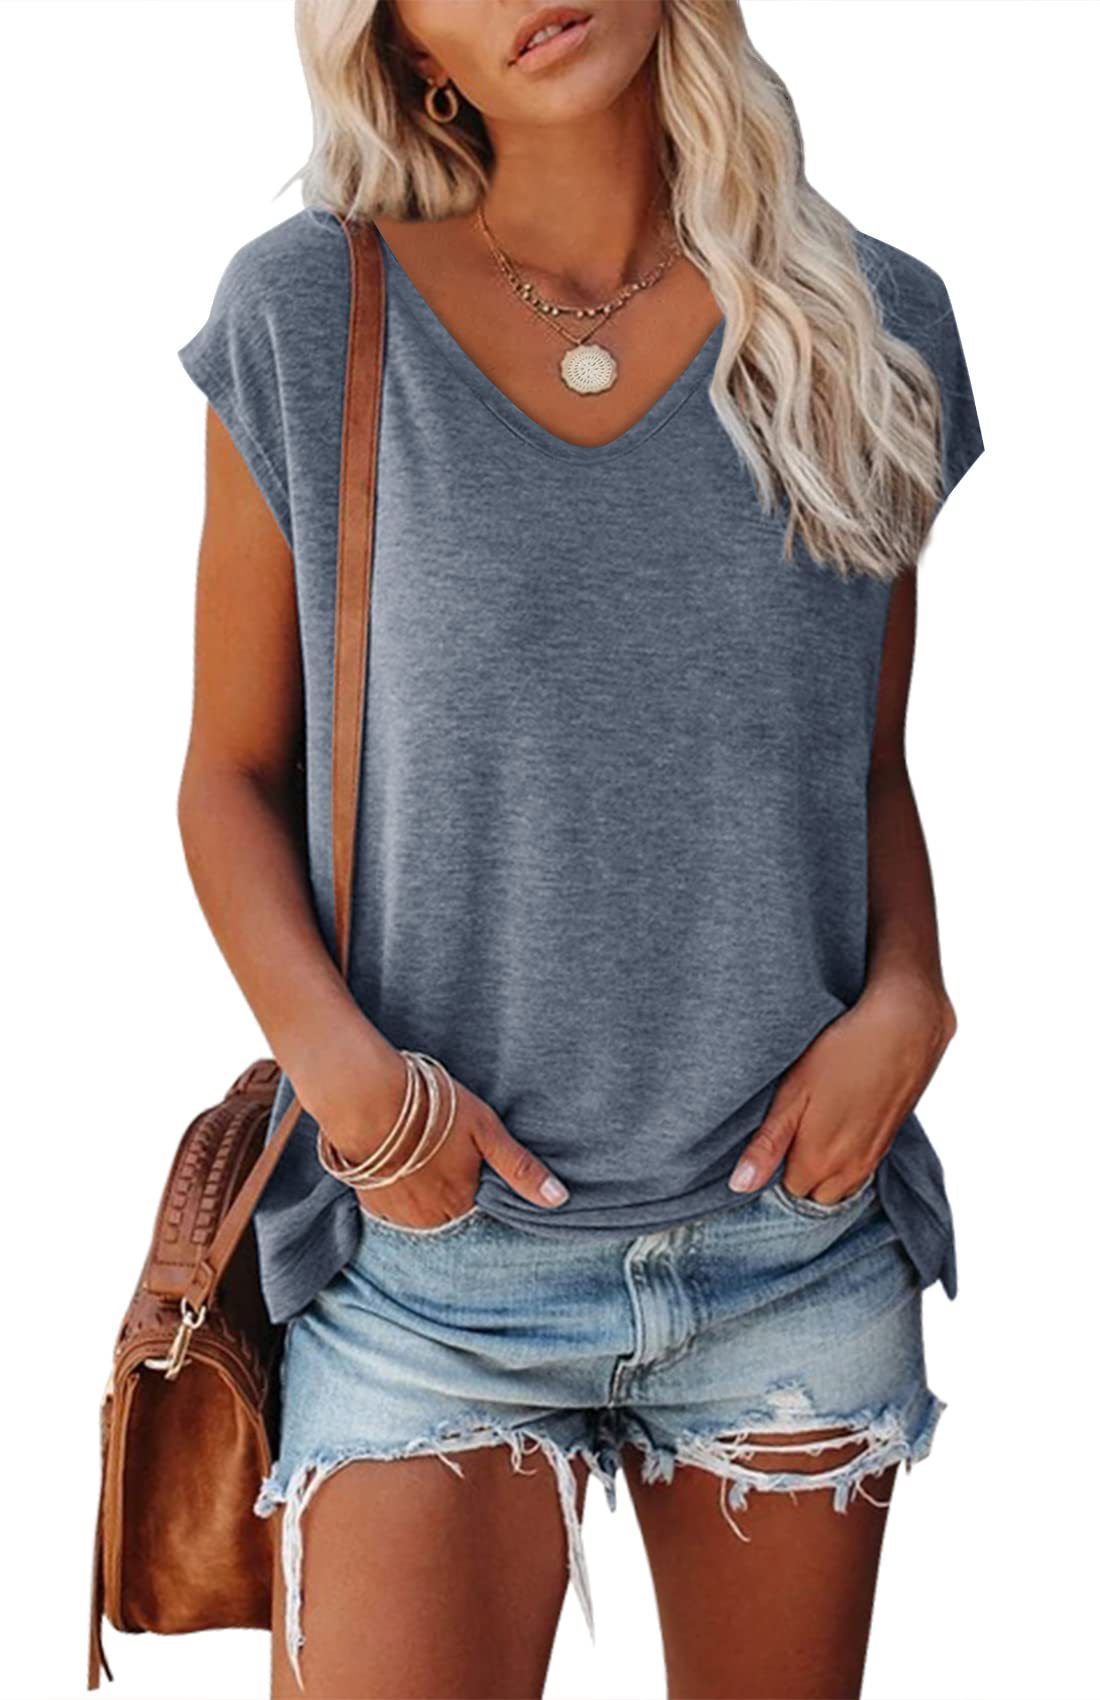 Solid Color V-neck Cotton Blend Casual Loose Sleeveless Top Women's T-shirt